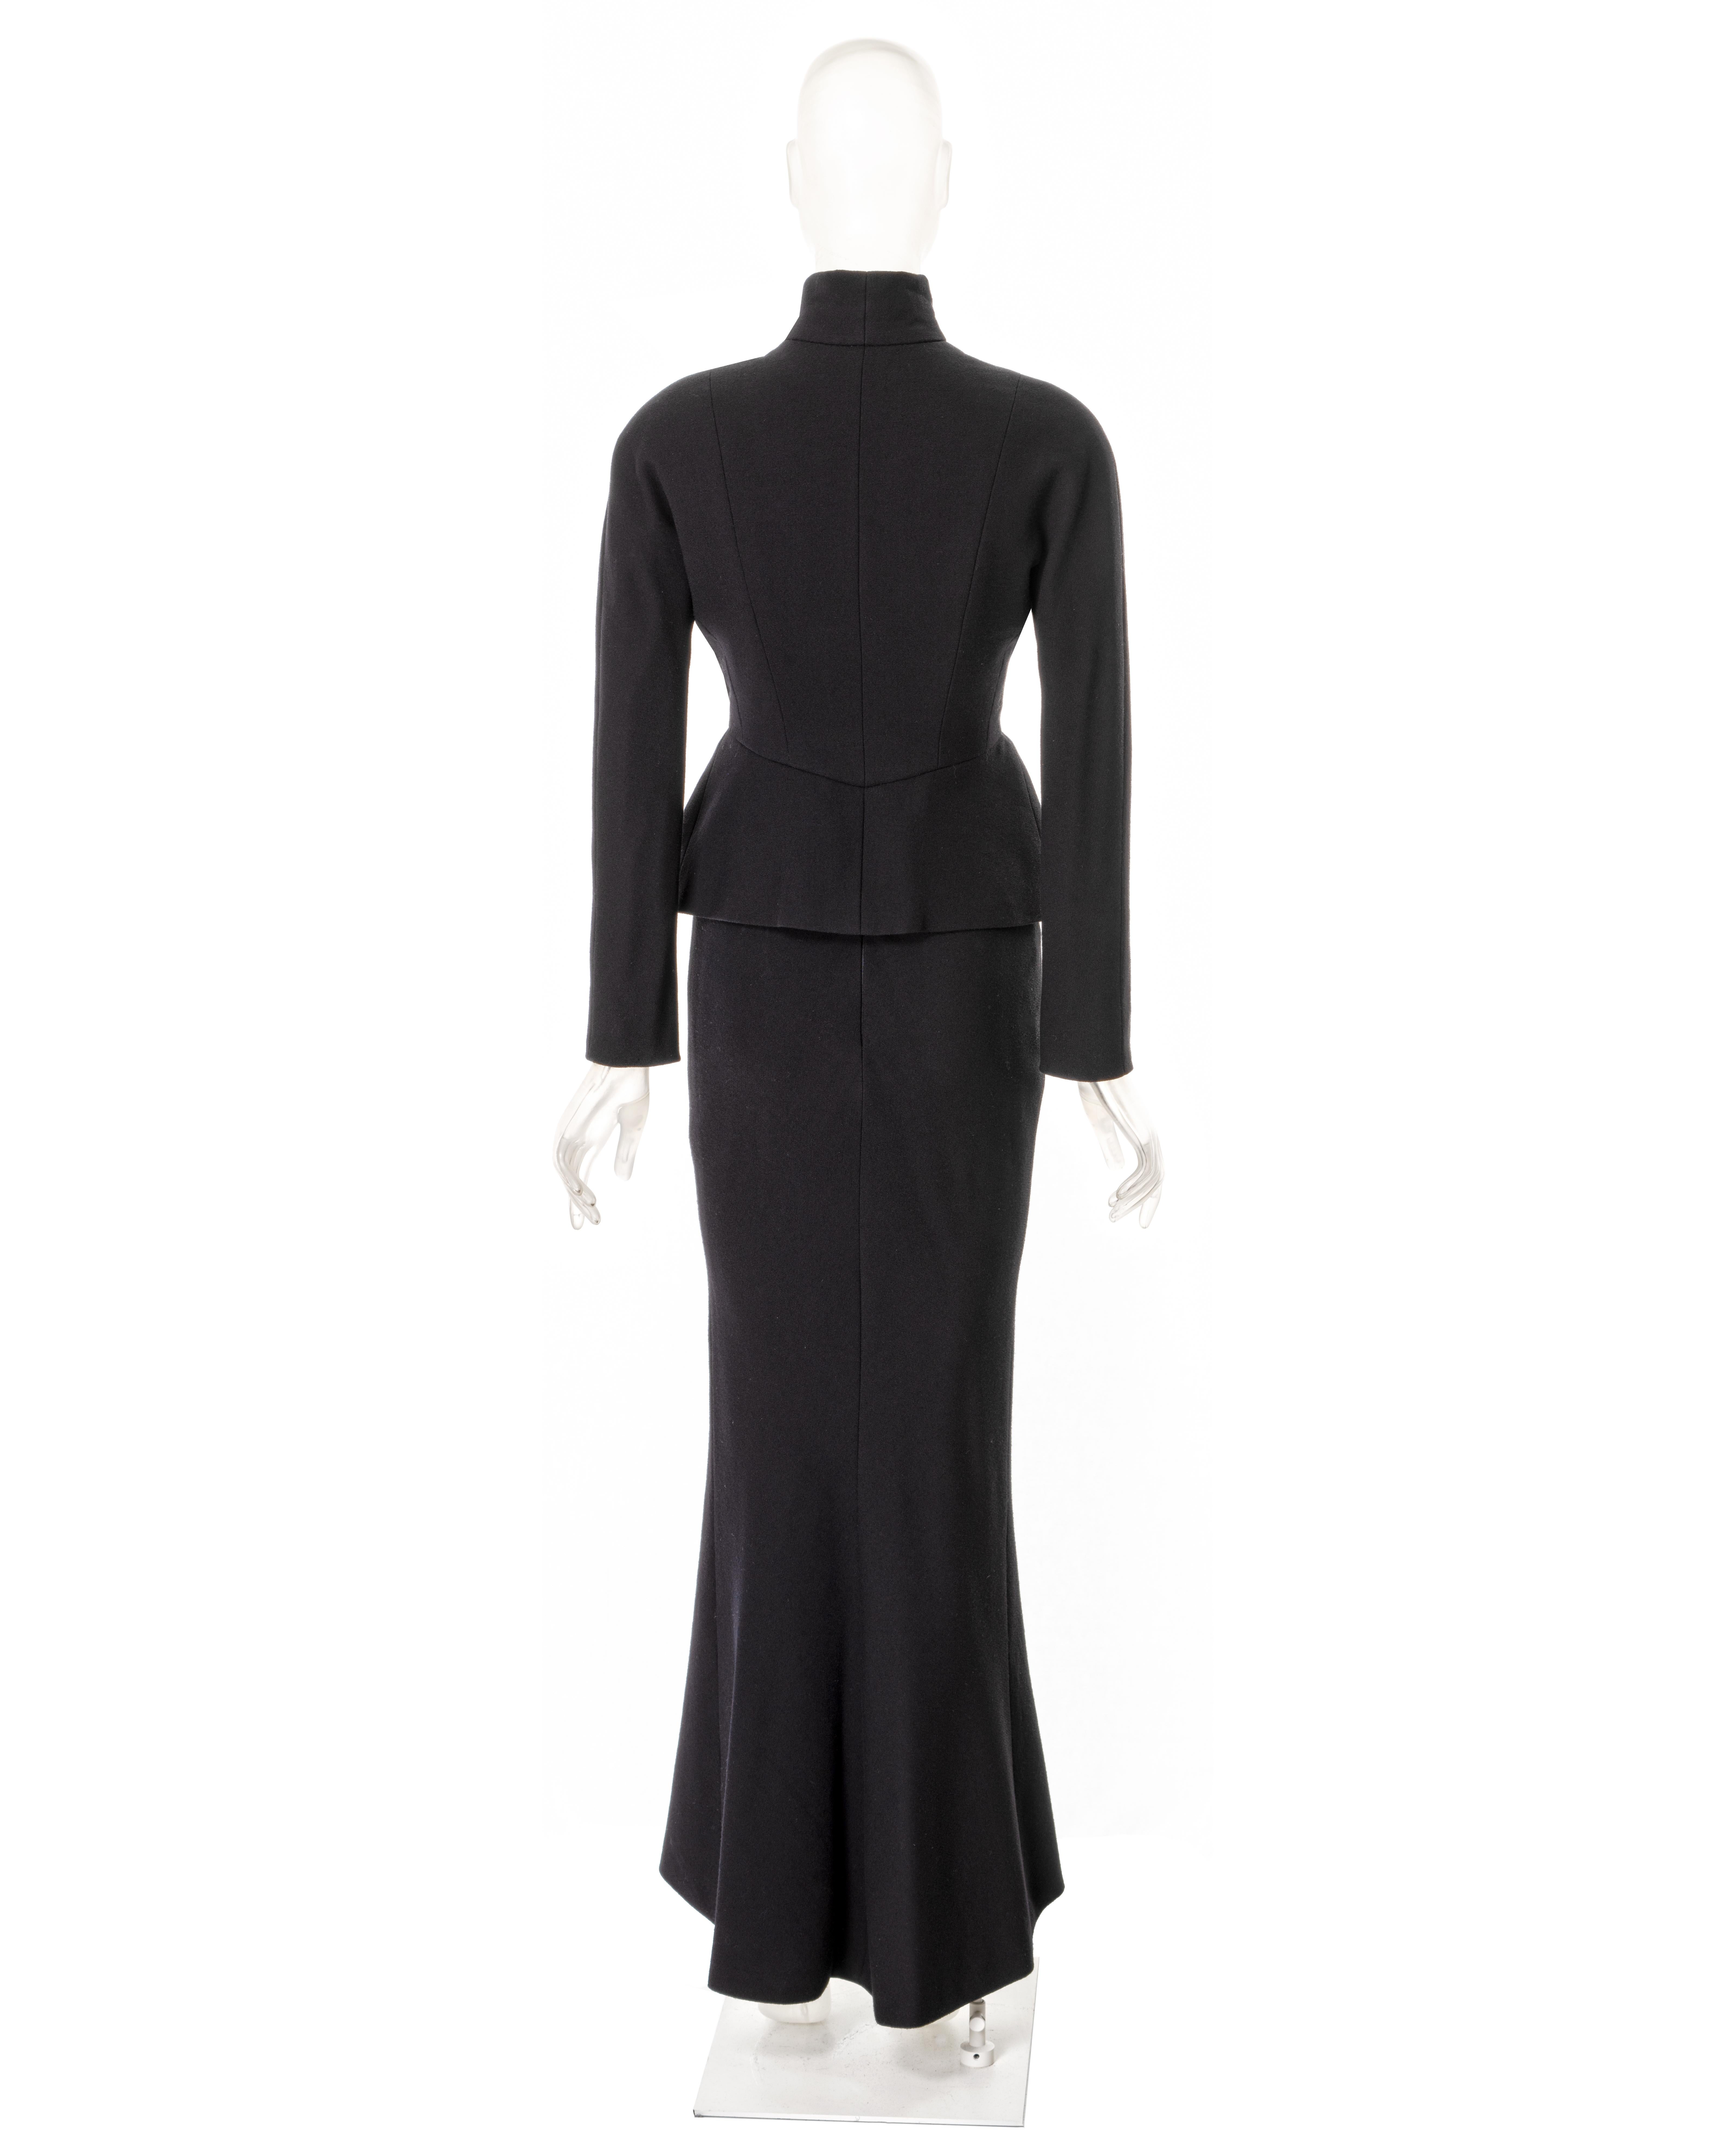 Christian Dior by John Galliano black wool crepe haute-couture bar suit, fw 1998 For Sale 5